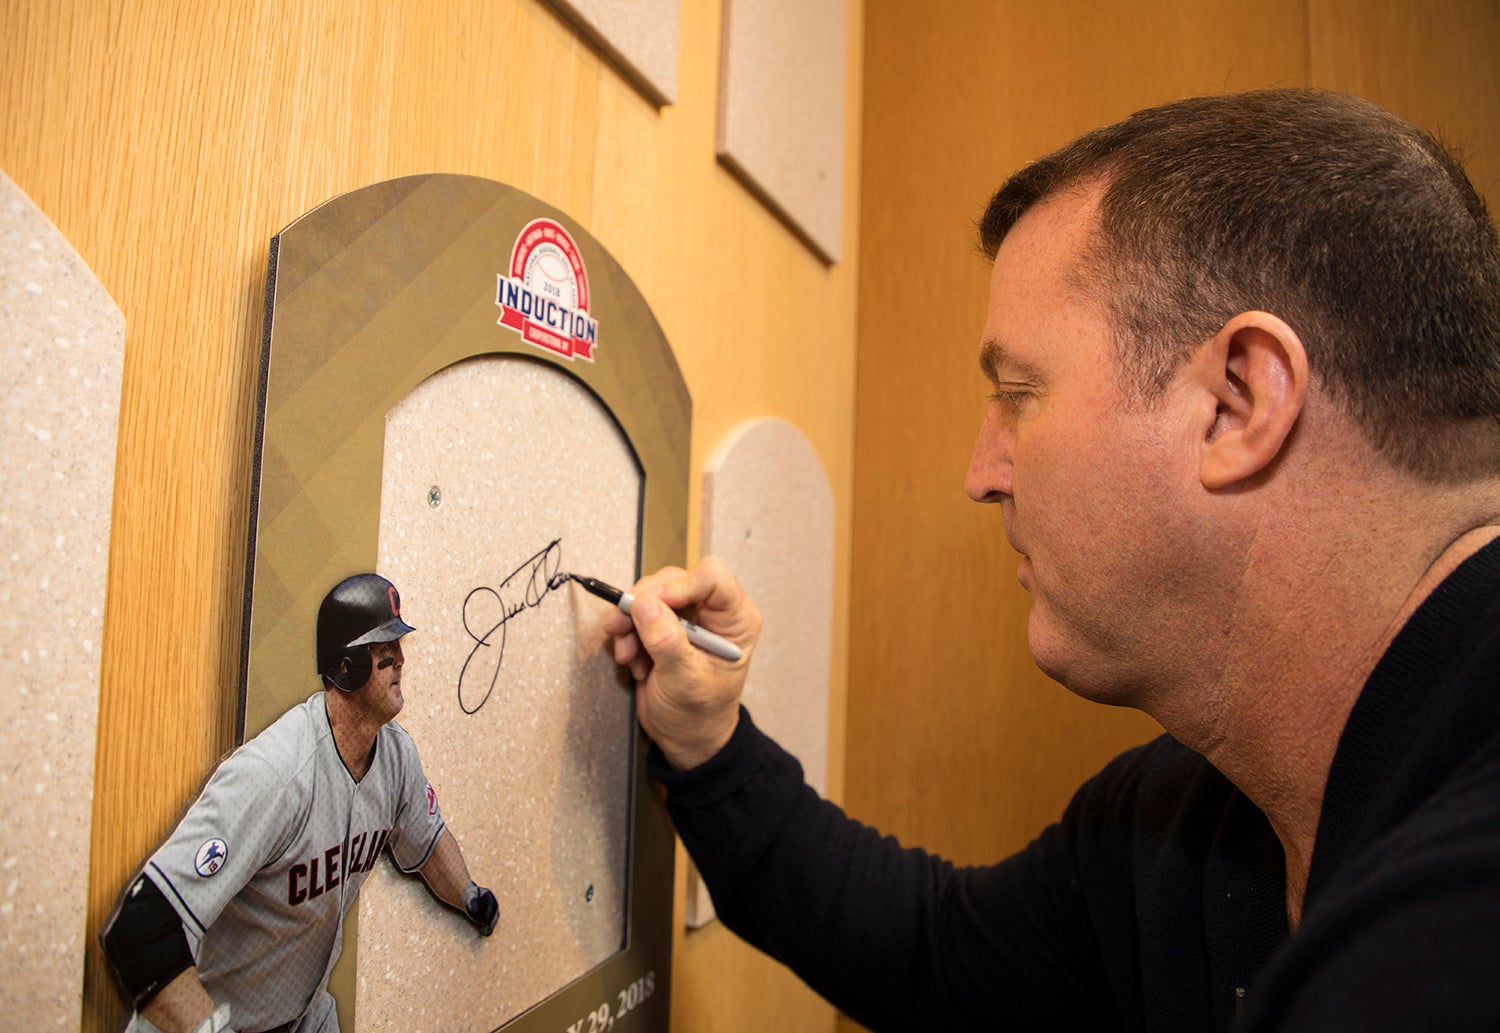 Thome overwhelmed by first visit to Cooperstown as Hall of Famer